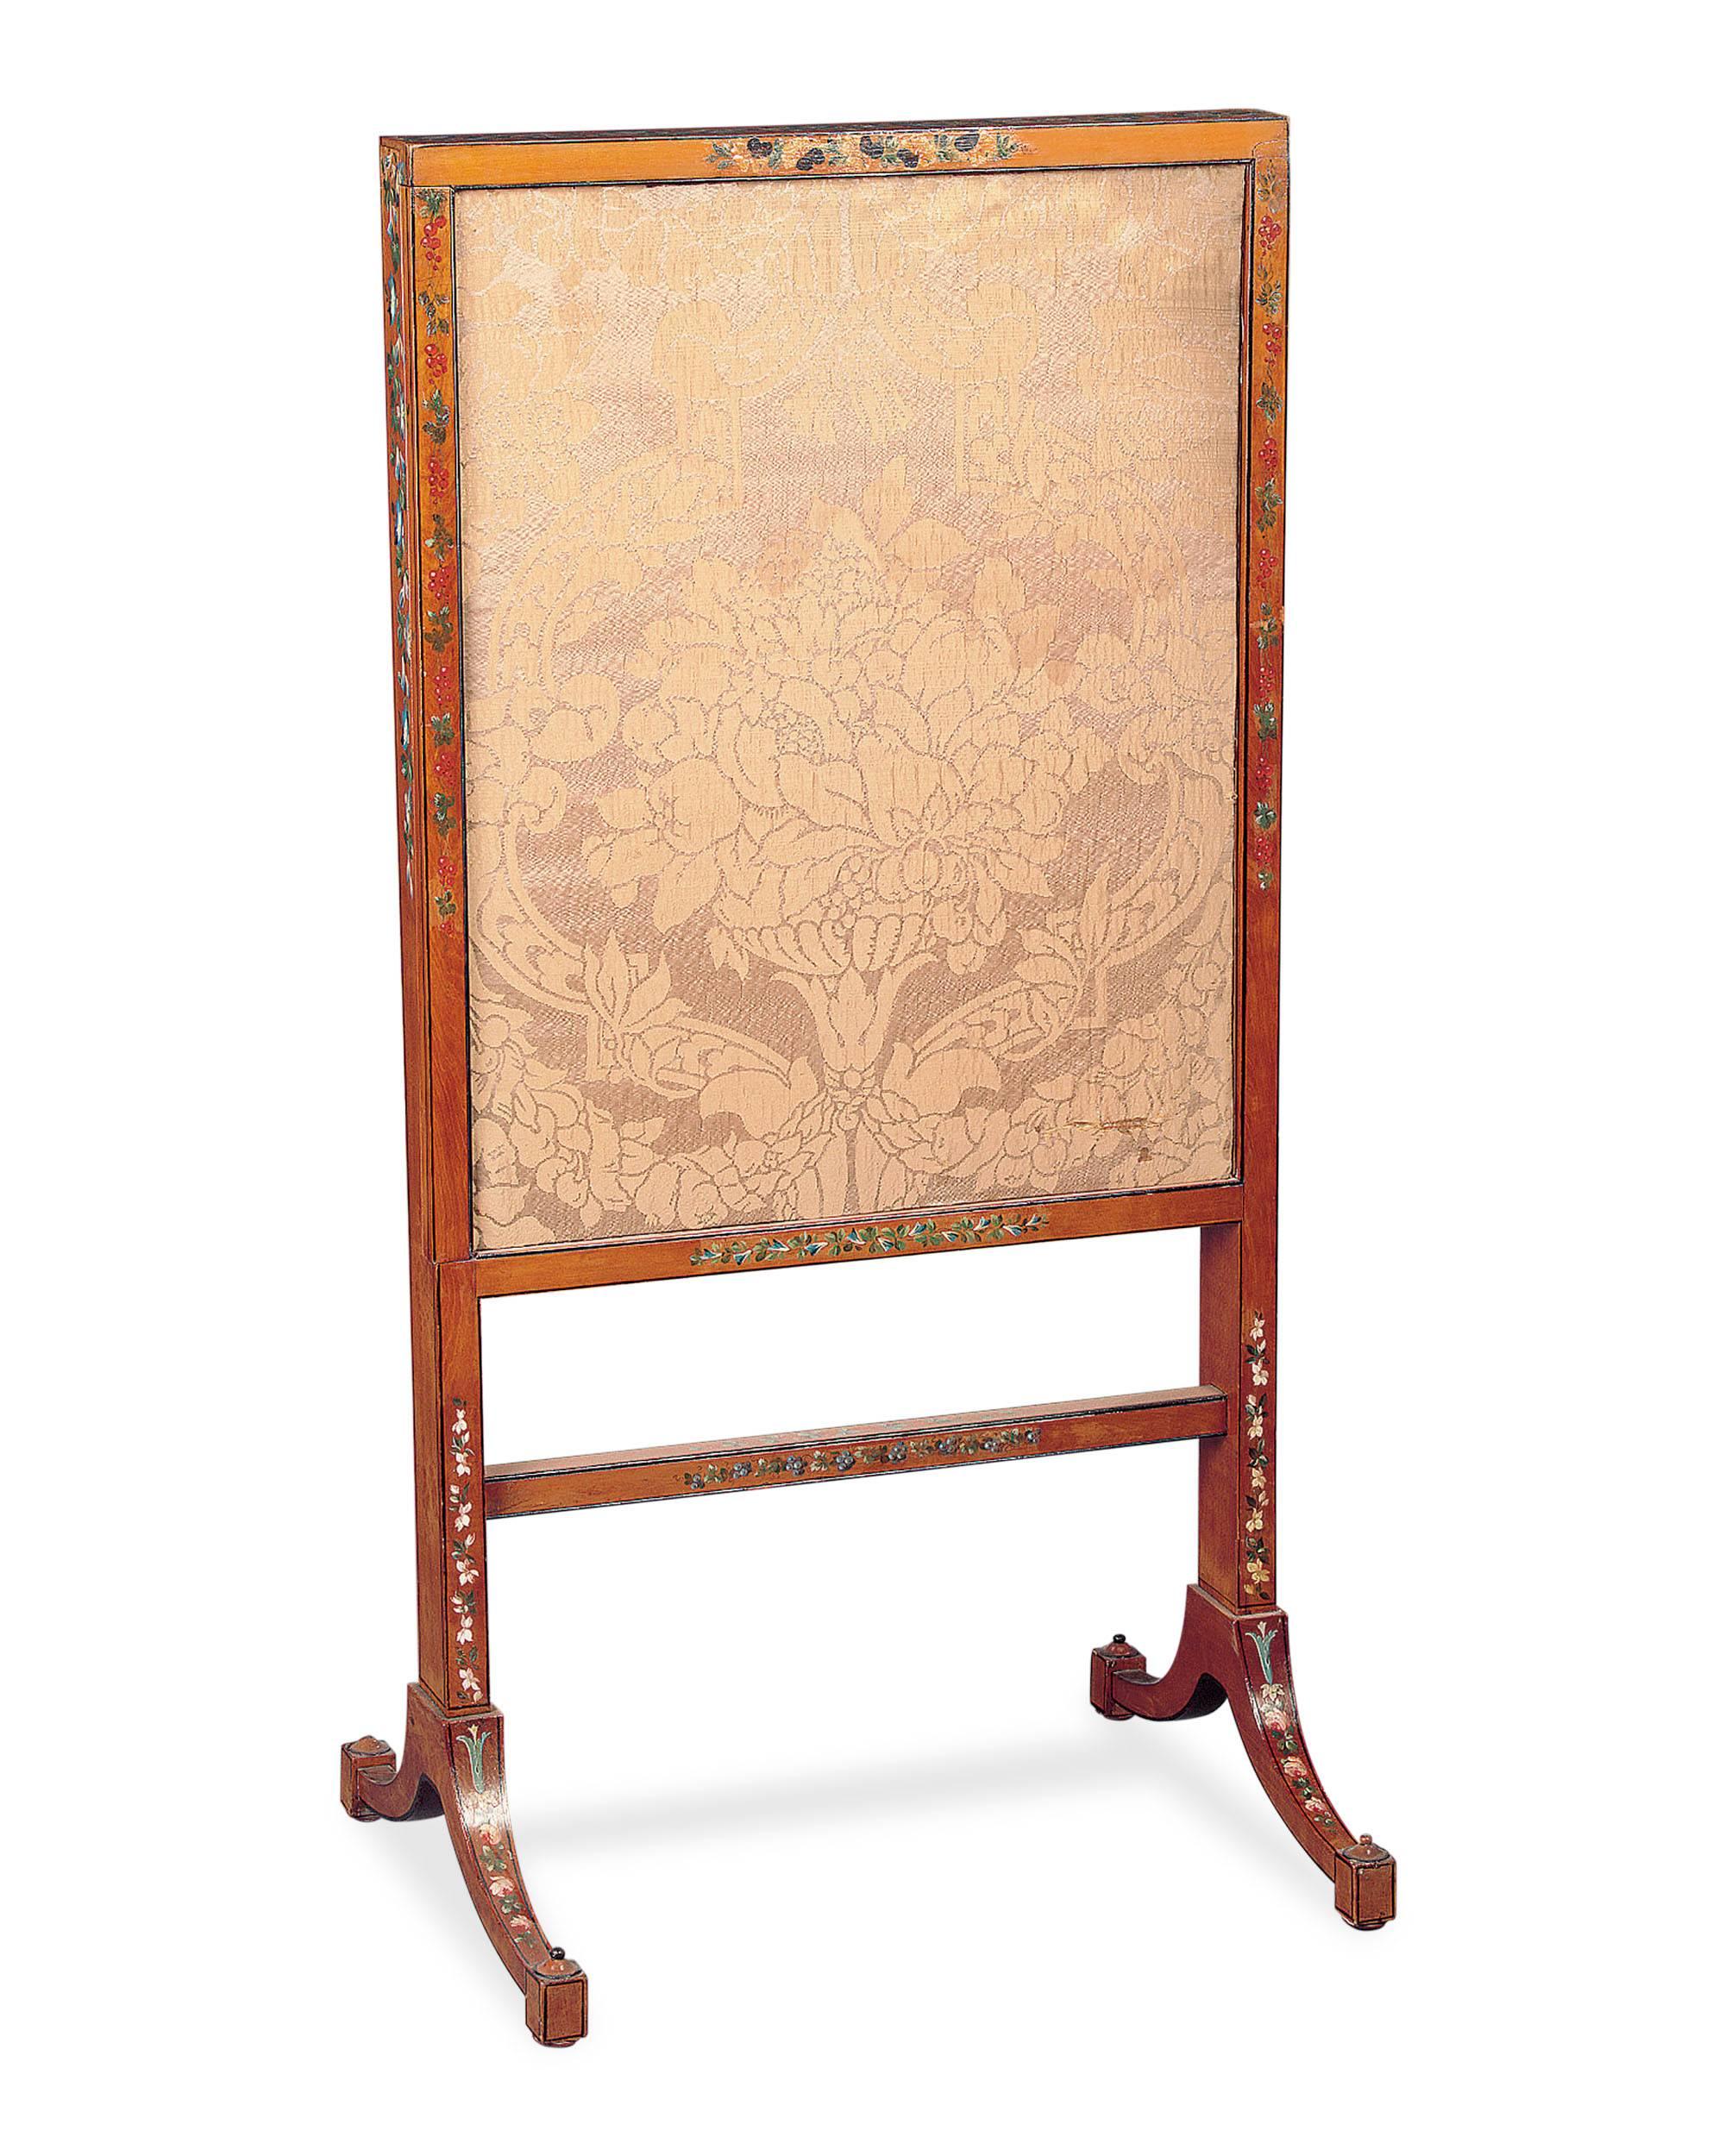 A fine English hand-painted satinwood fire screen in the Sheraton style with silk upholstered panels that extend from either side of the screen. The screen features exquisitely painted decoration and is in excellent condition.

circa